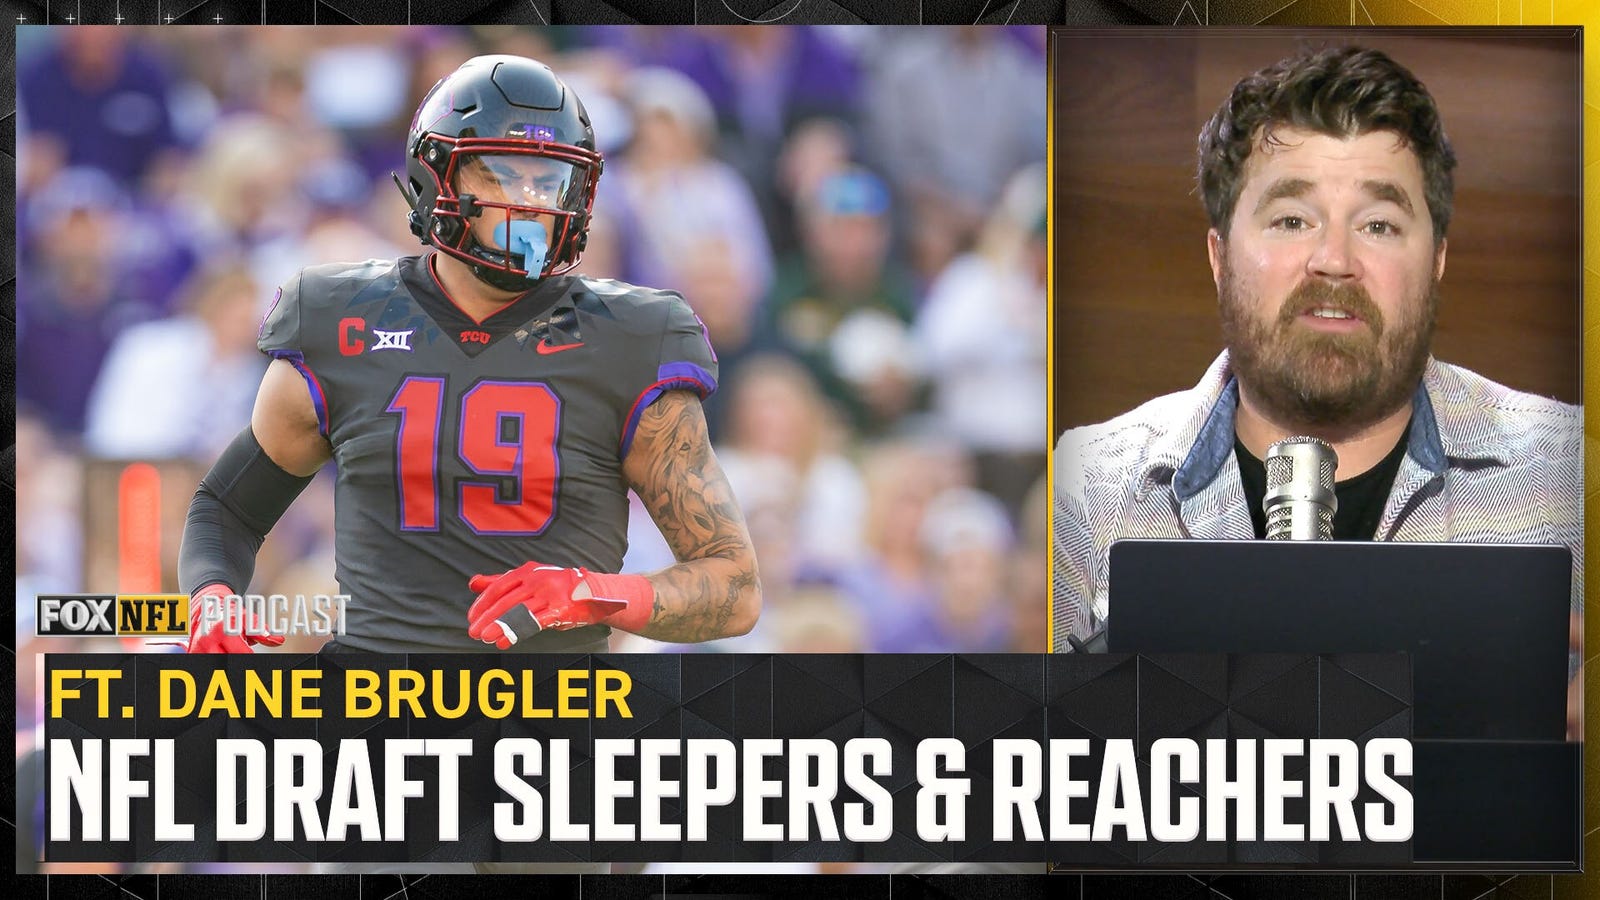 Biggest NFL Draft sleepers and reachers to watch for 